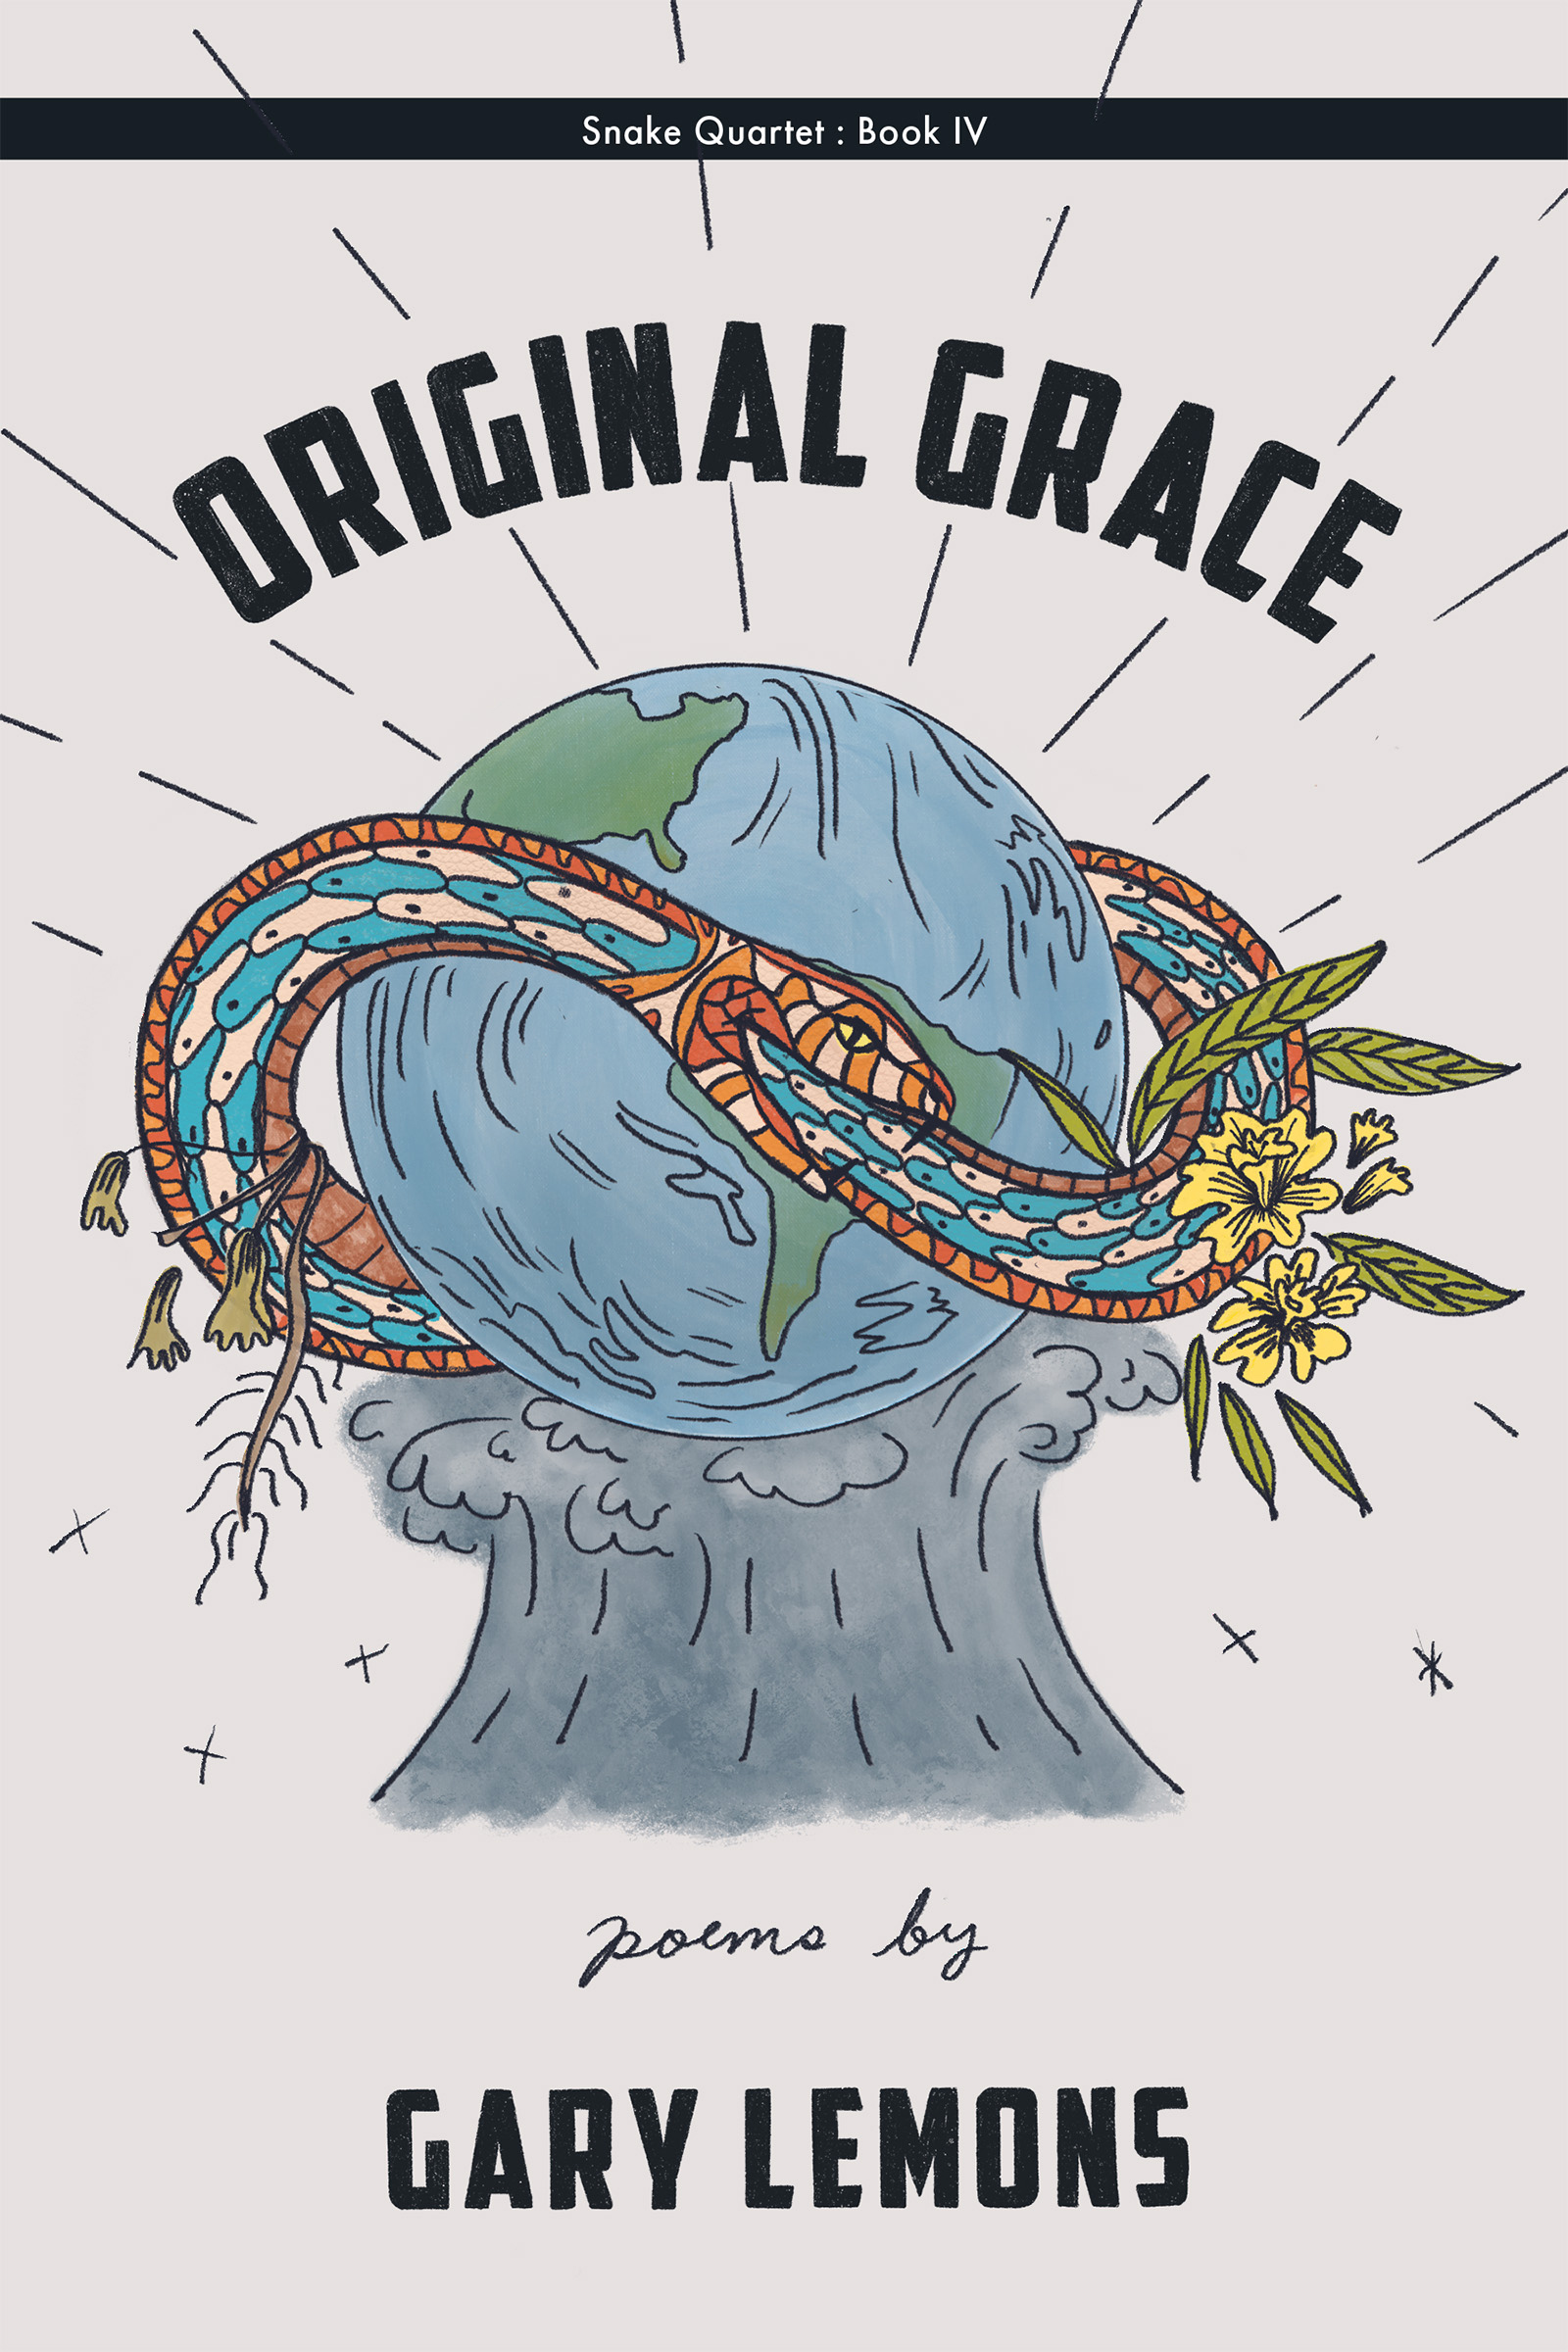 A colorful graphic design of the planet earth with a snake wrapped around it, with black script on towards the top that reads Original Grace poems by Gary Lemons.